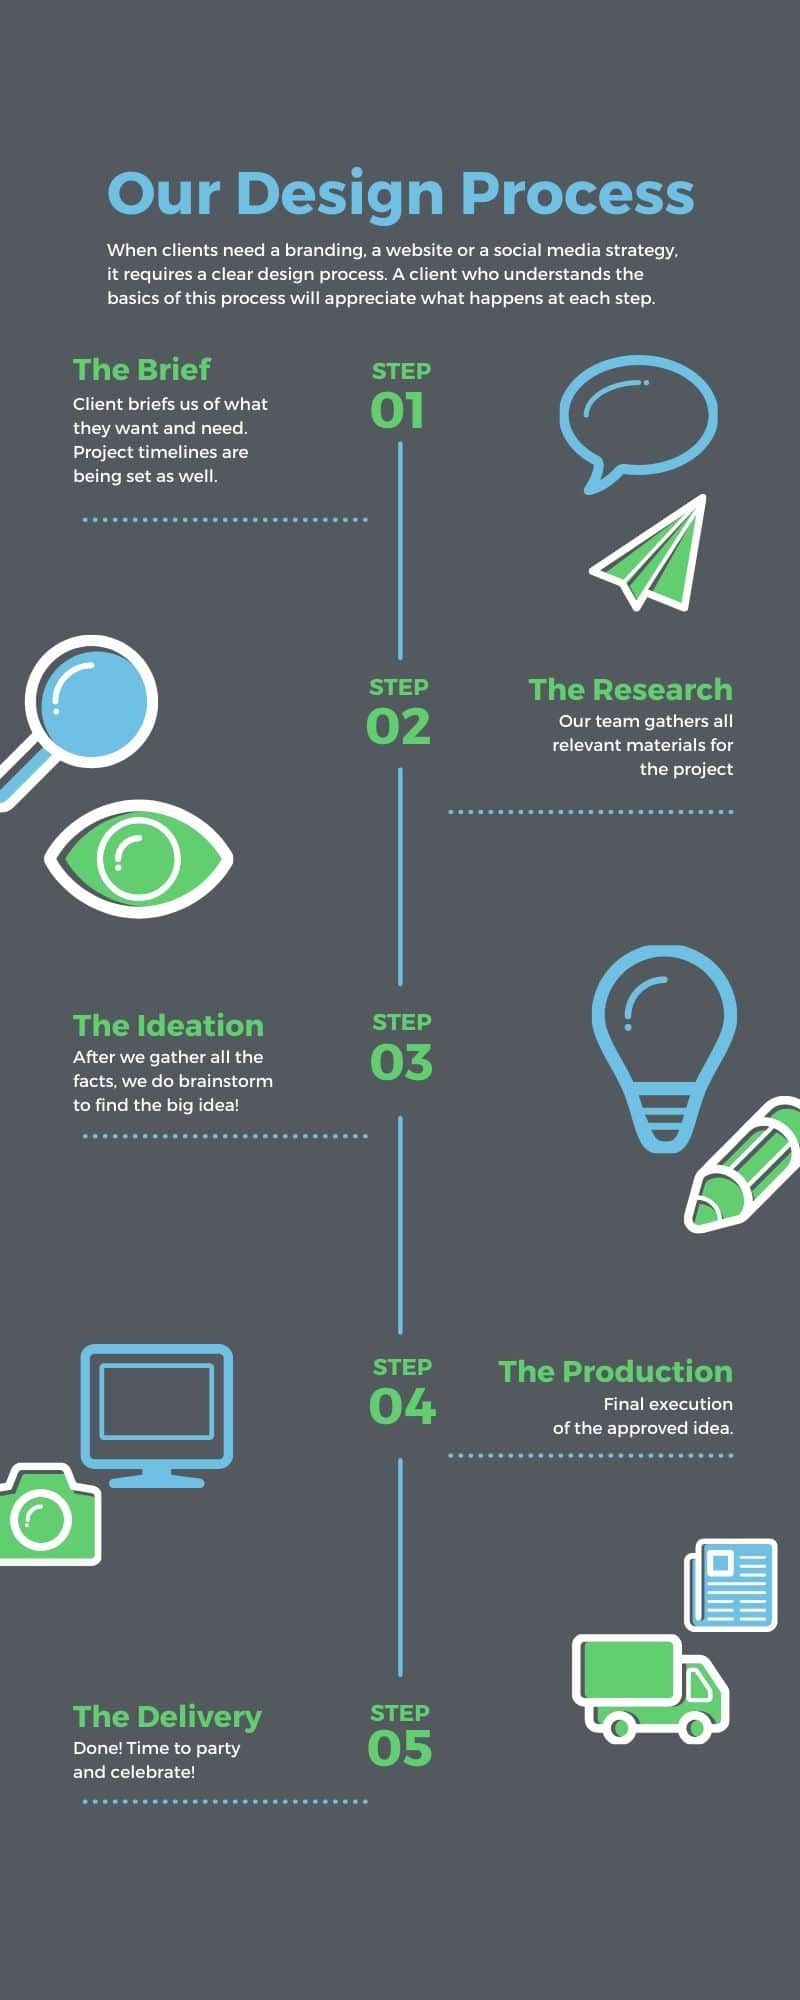 An infographic detailing a 5 step process to website design